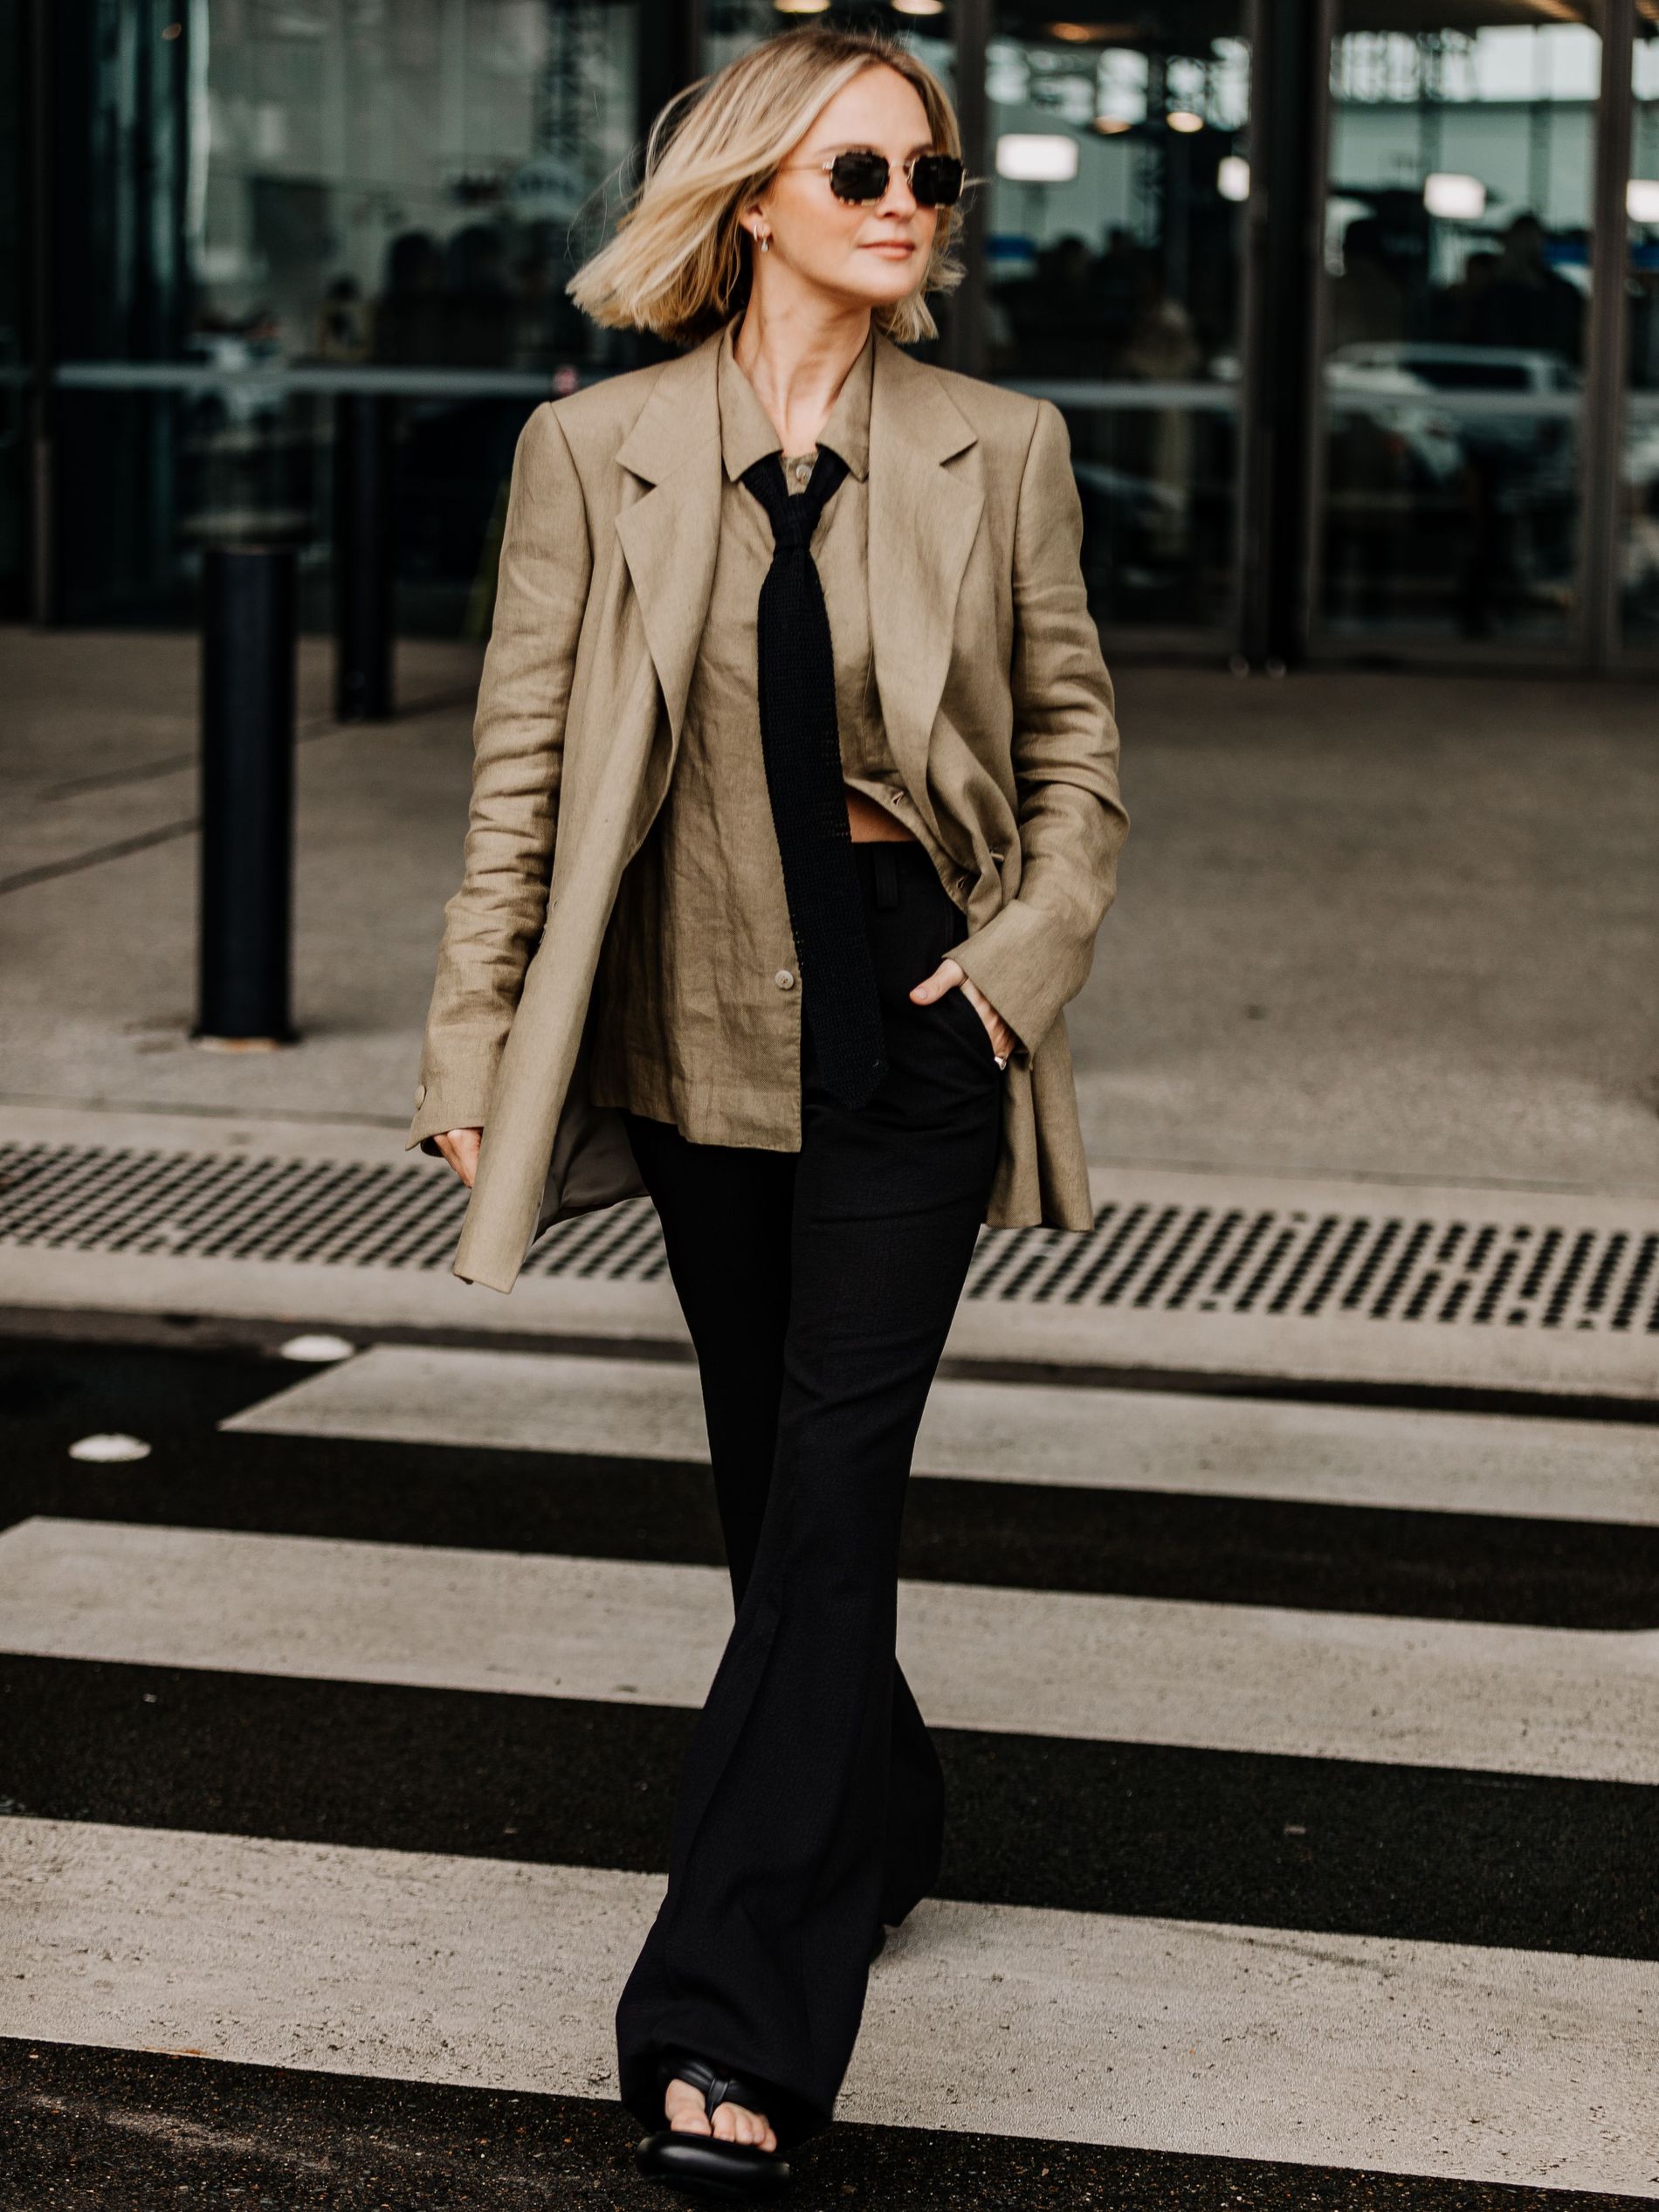 Woman wearing beige blazer and shirt with black necktie and trousers